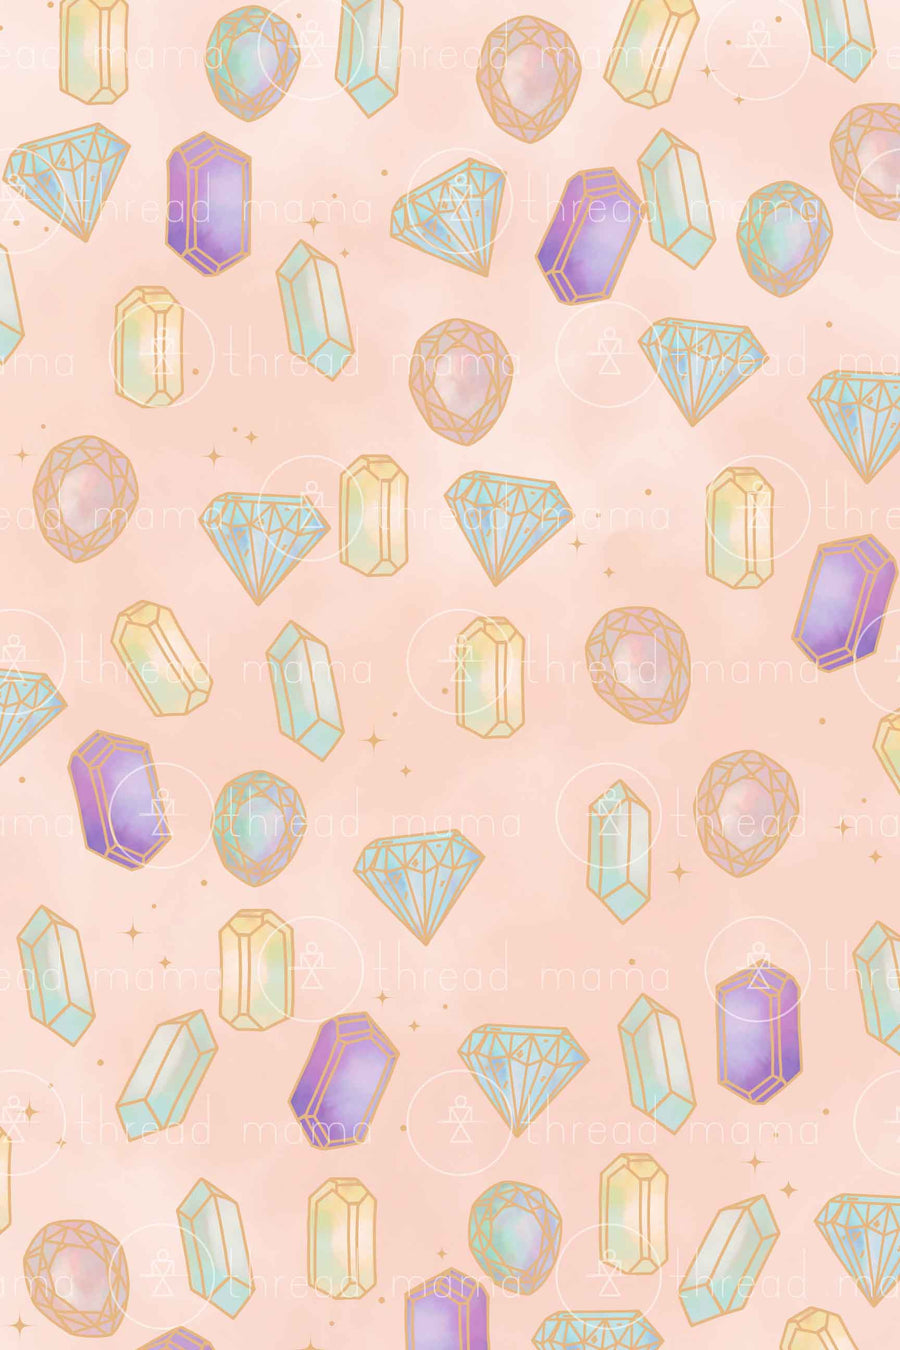 Background Pattern #11 (Printable Poster)